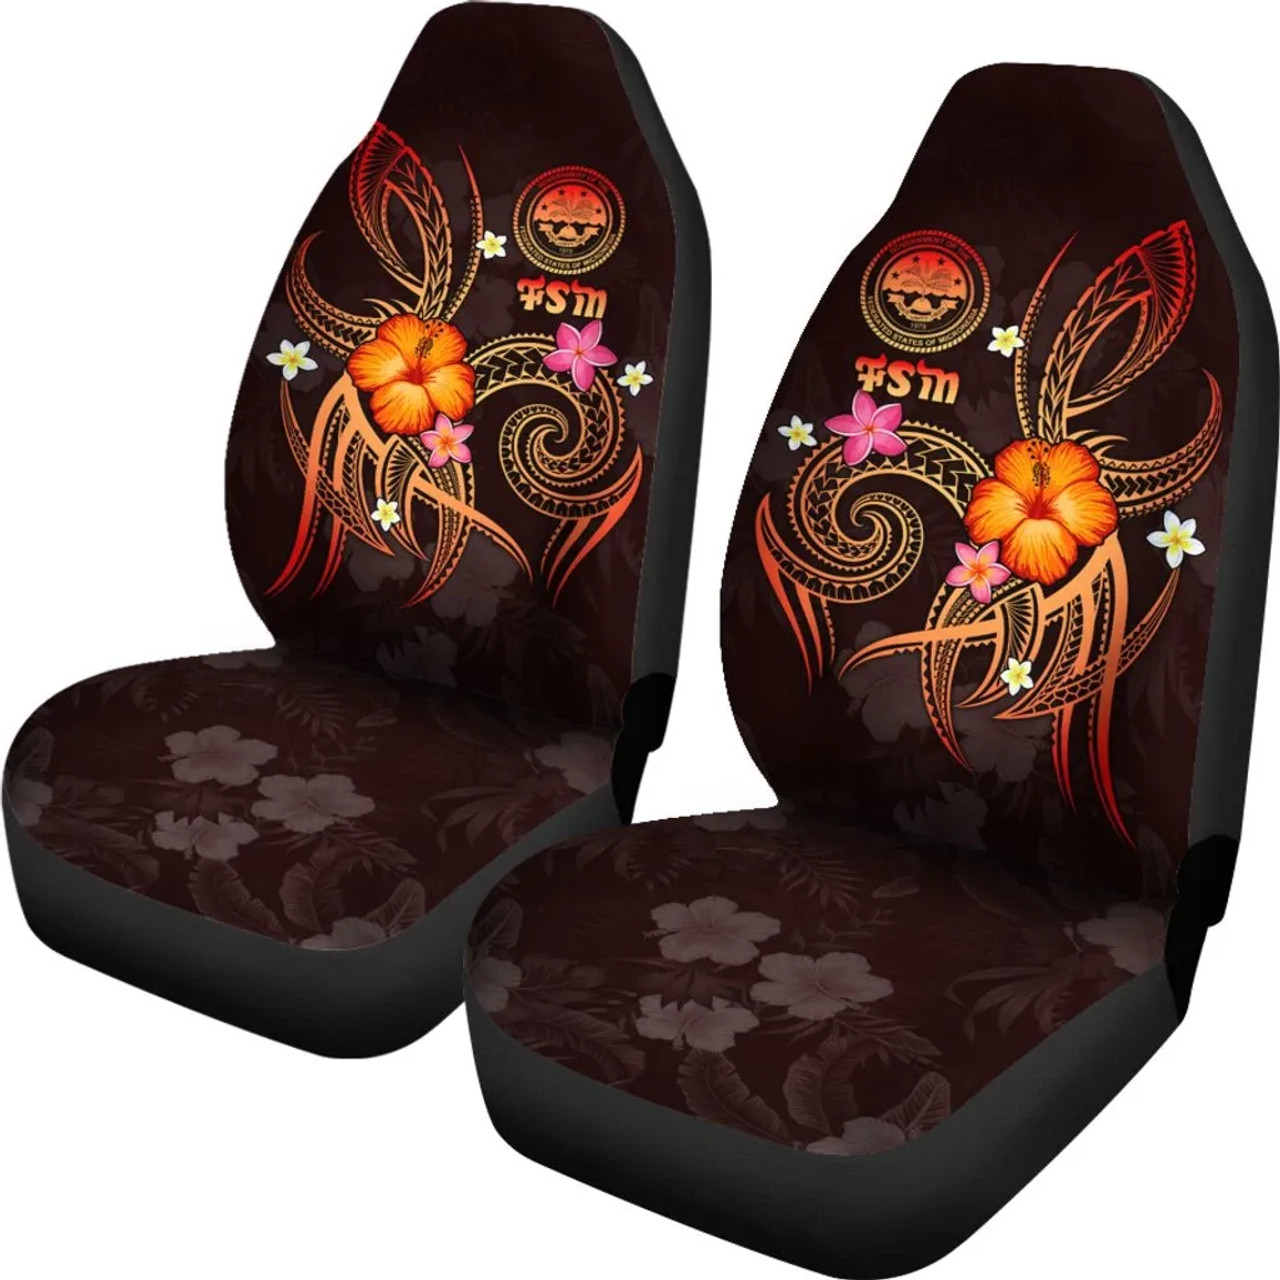 Federated States of Micronesia Polynesian Car Seat Covers - Legend of FSM (Red)